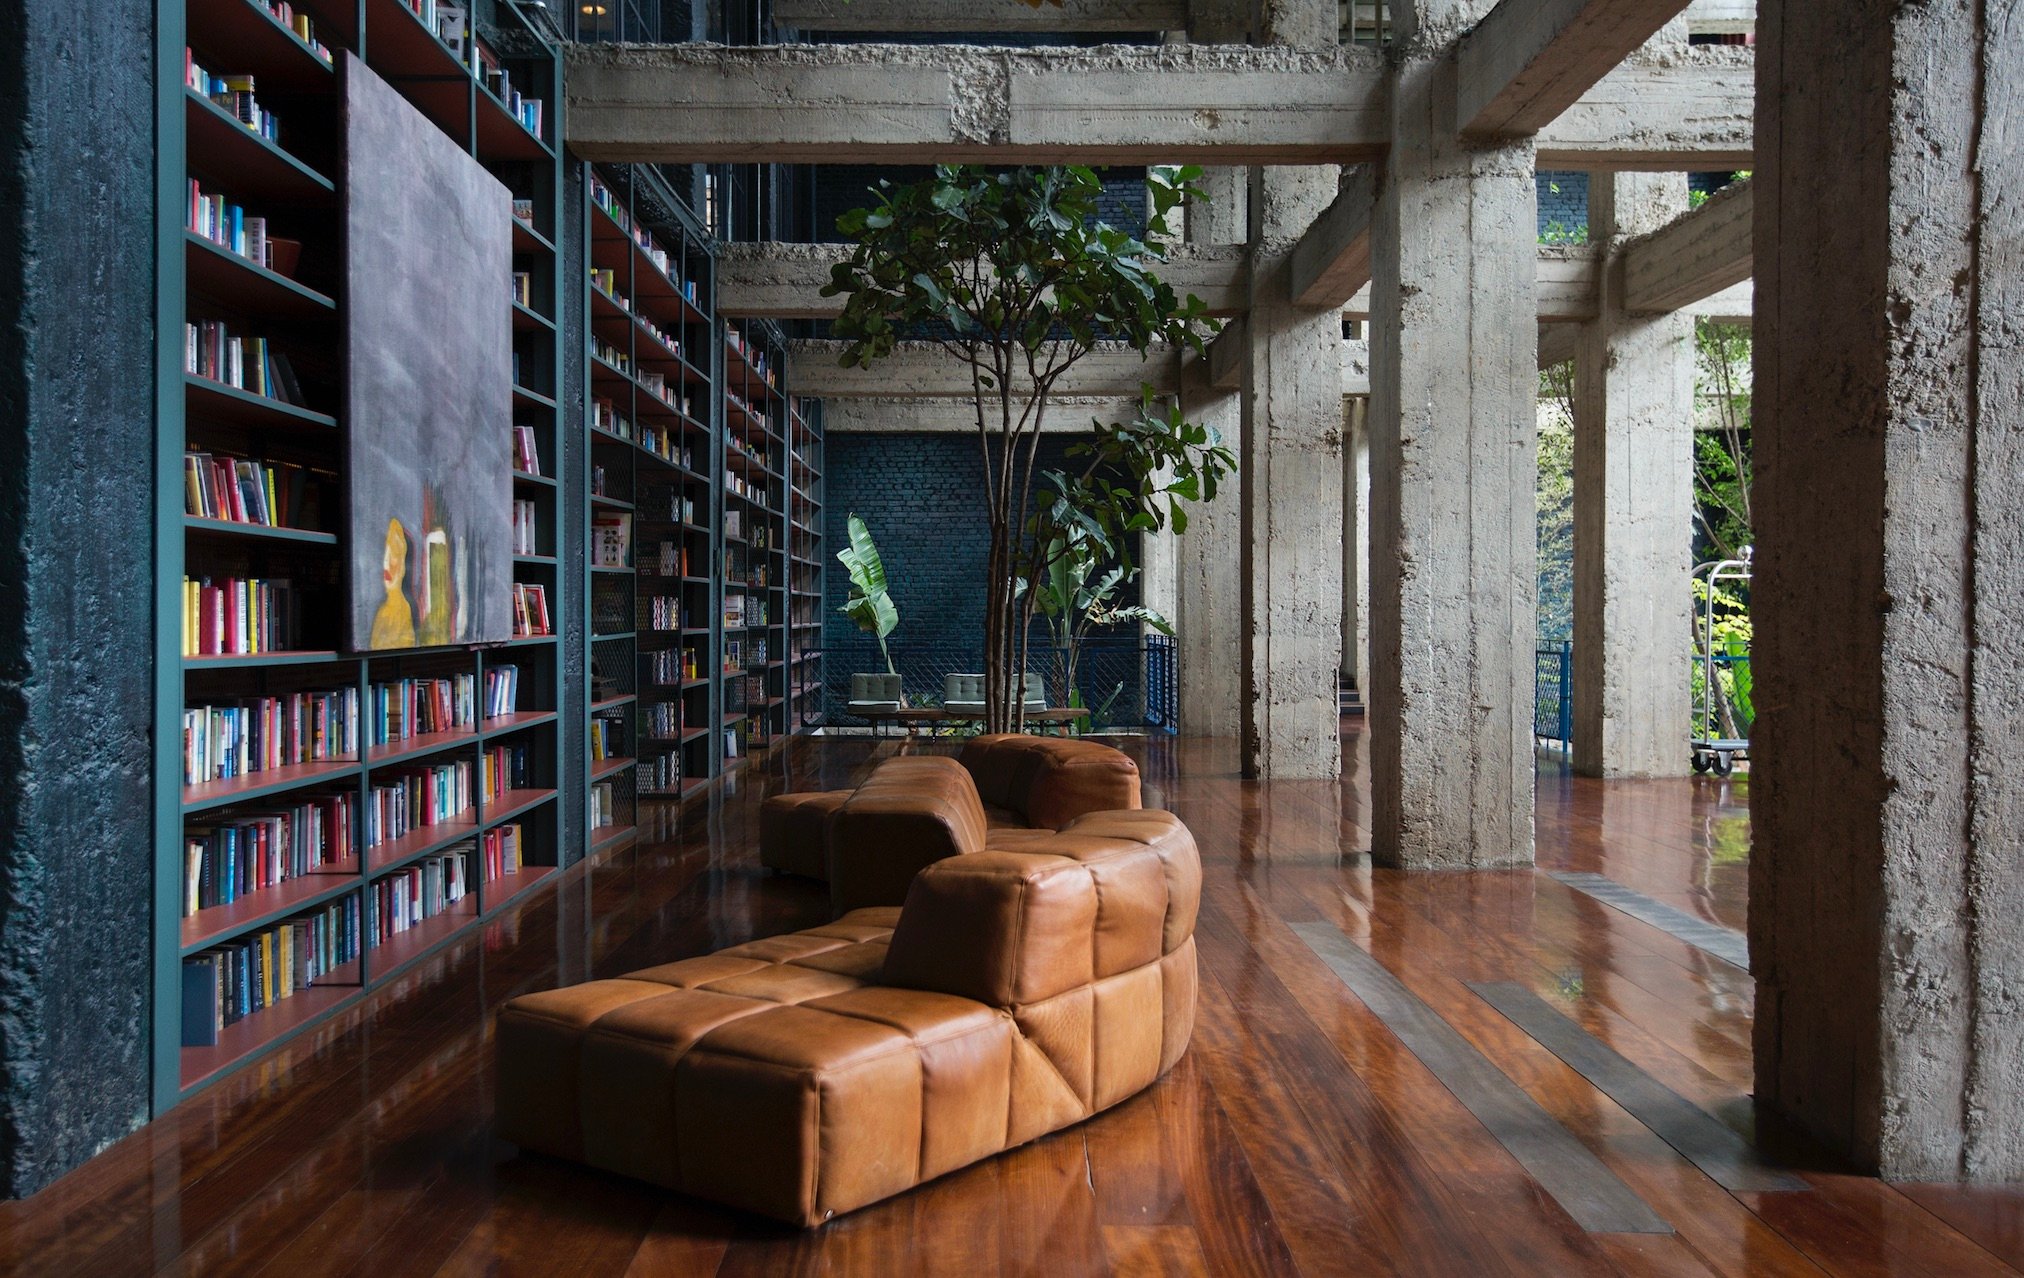 Stay at Tbilisi’s industrial chic hotel-cum-cultural hub set in a former printing house | The Escapist 